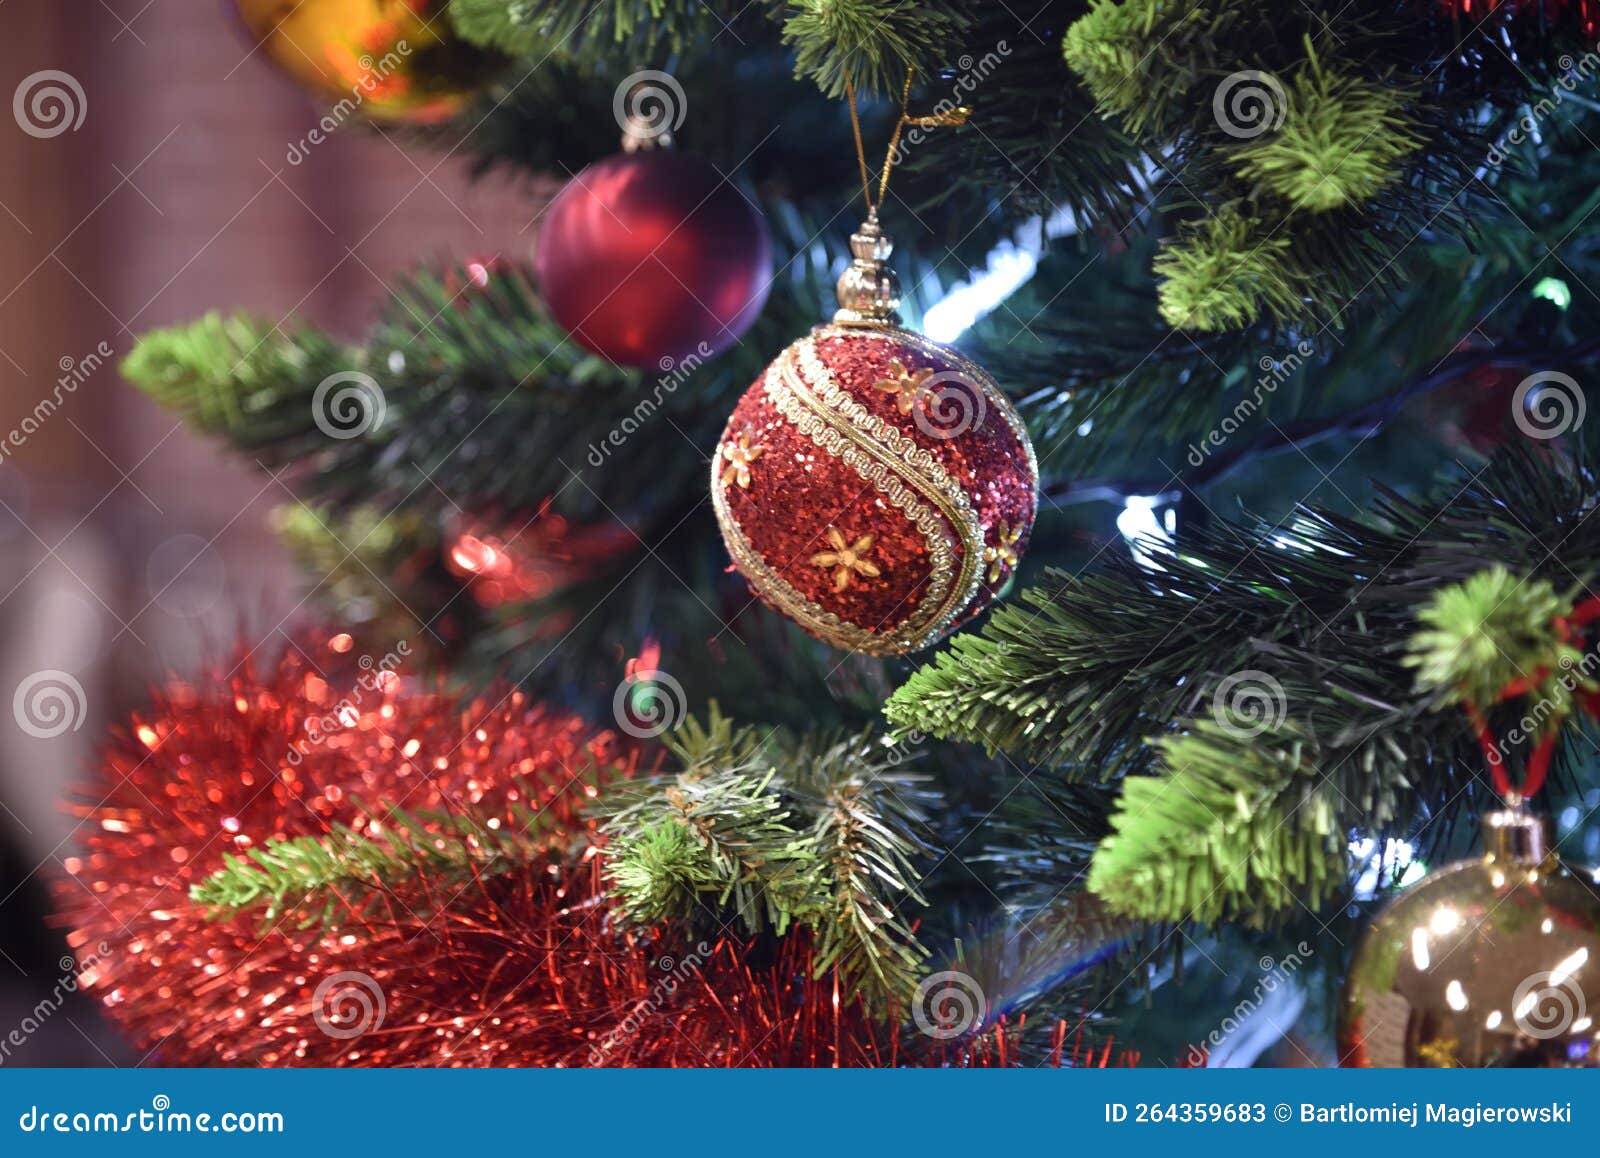 Christmas Tree with Red Ball and Chain Stock Image - Image of home ...